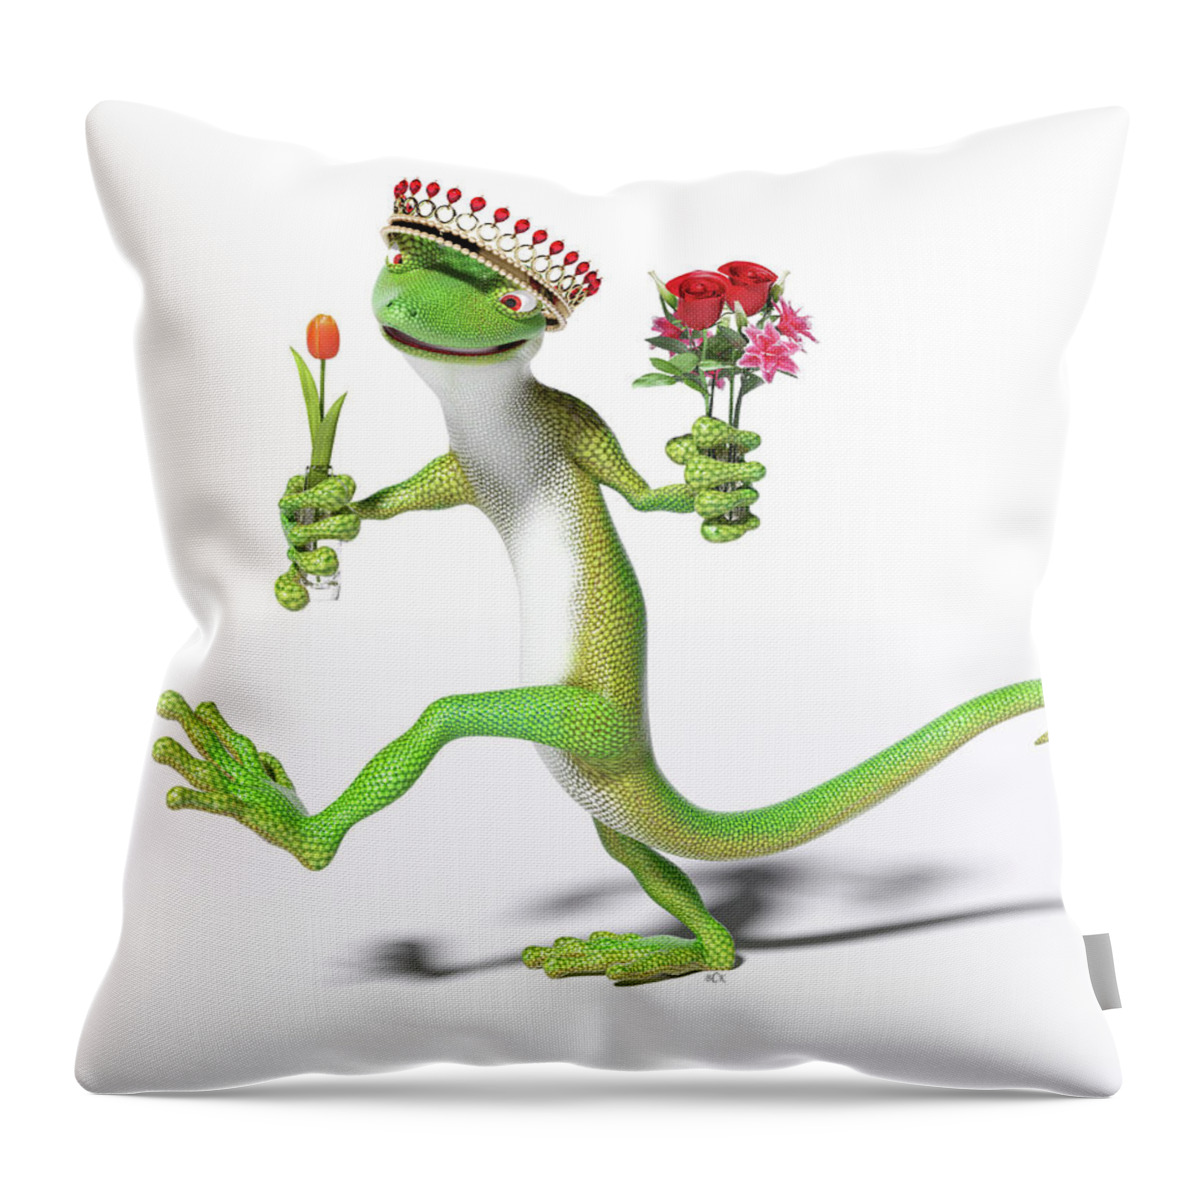 Gecko Throw Pillow featuring the digital art Hopeful Prince Charming by Betsy Knapp